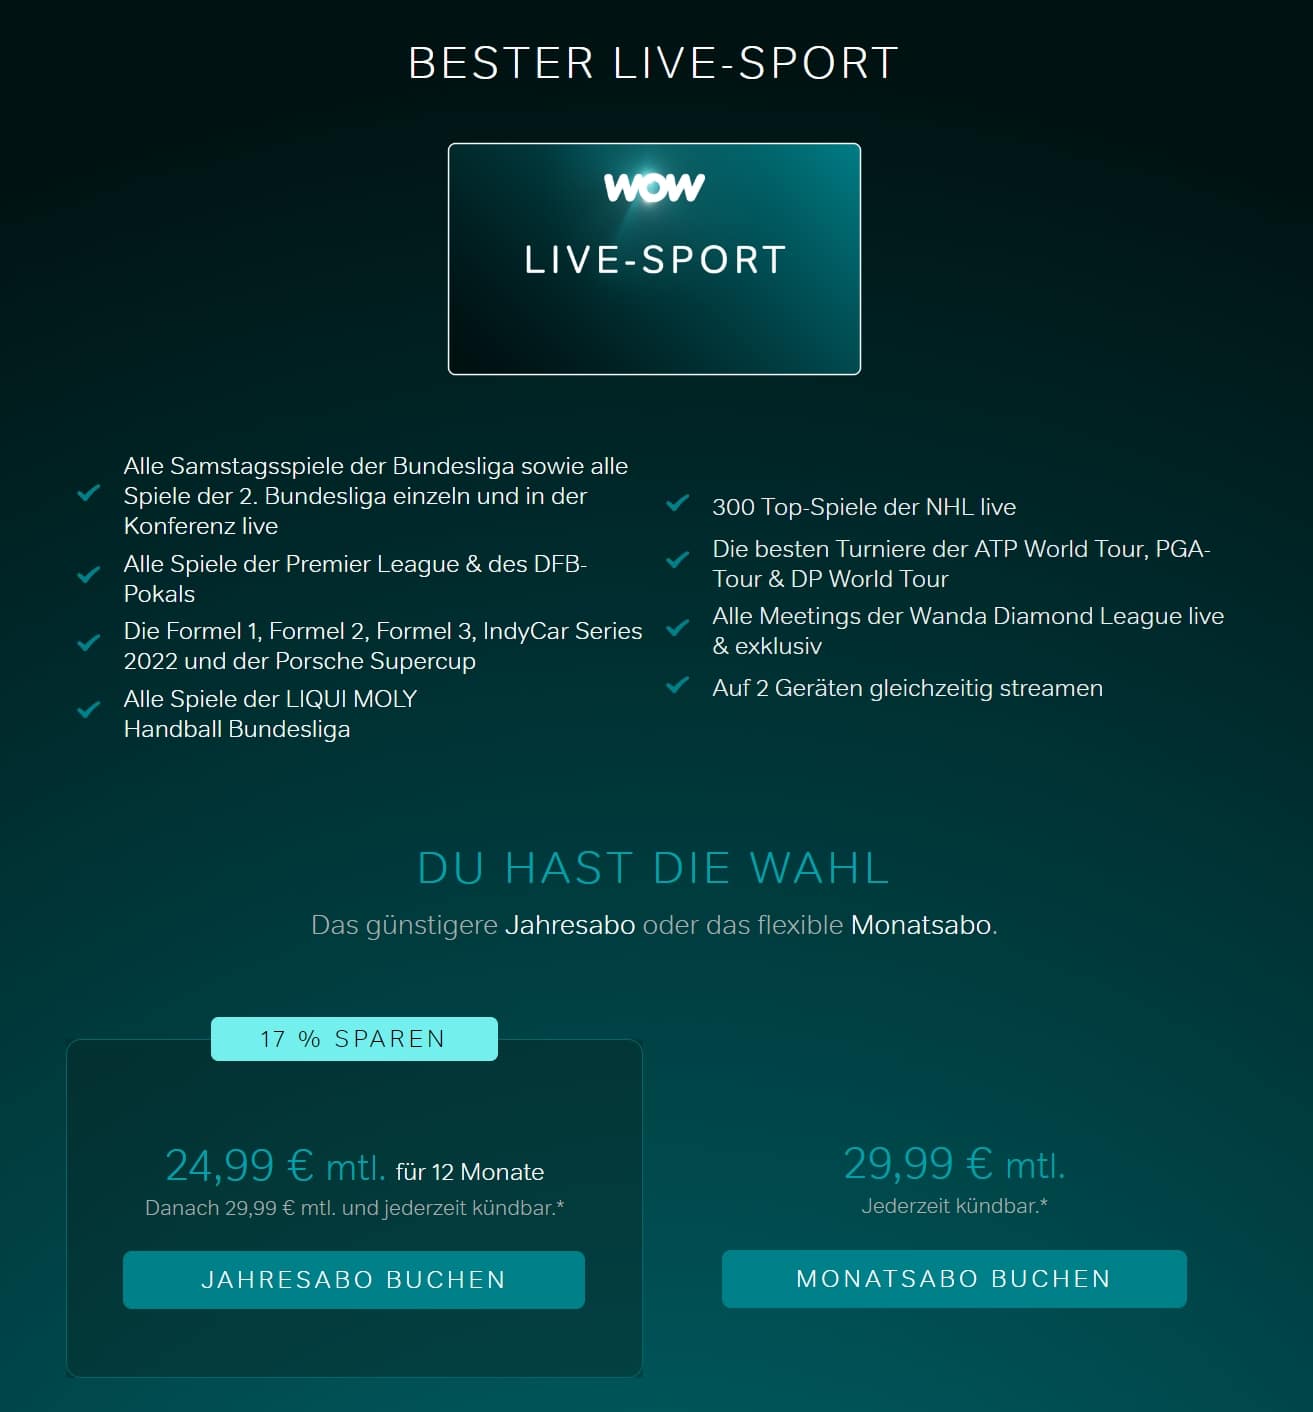 wow-live-sport-angebote